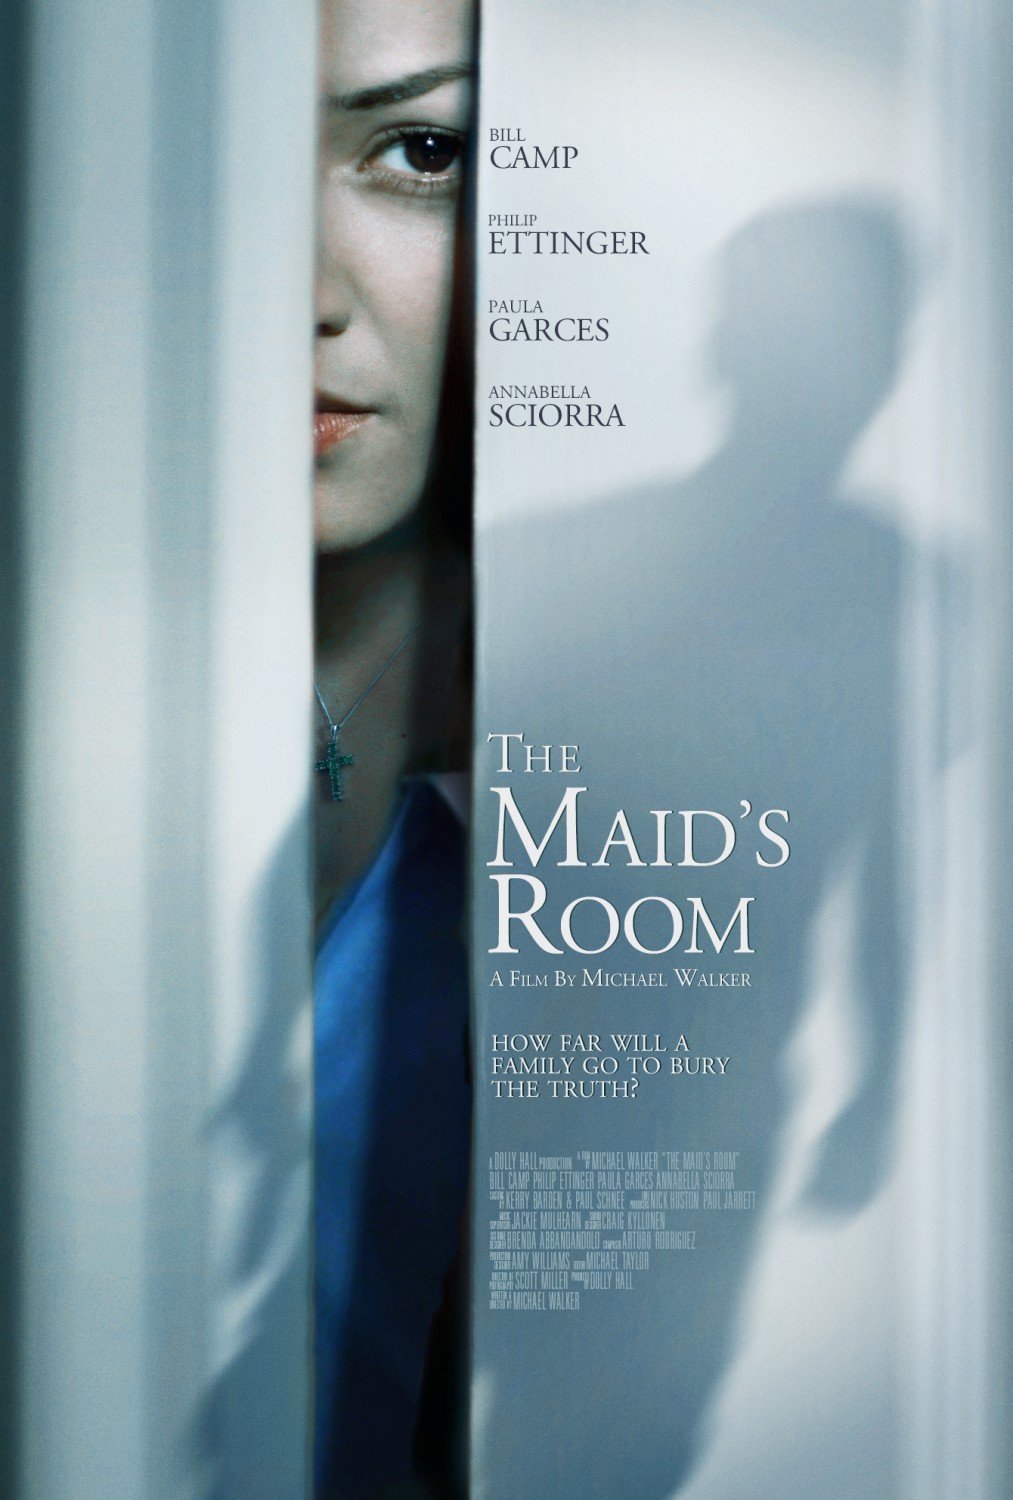 Poster of Paladin's The Maid's Room (2014)